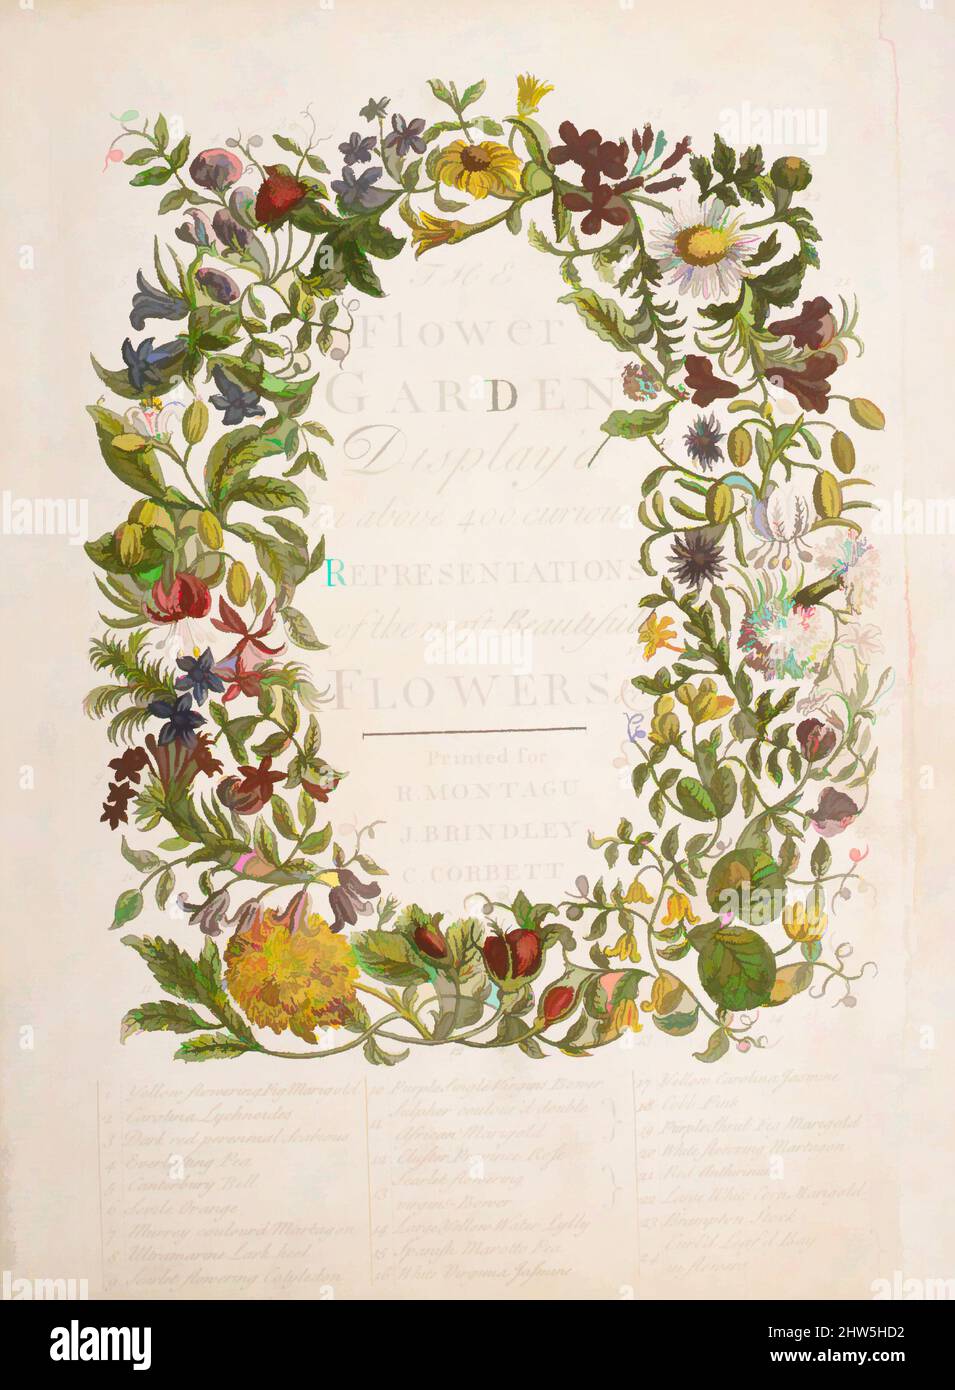 Art inspired by The Flower-Garden Display'd, In Above Four Hundred Curious Representations Of the Most Beautiful Flowers; Regularly Dispos'd in the Respective Months of Their Bloom, 1734, Illustrations: hand-colored etching and engraving, Book: 9 7/8 x 7 13/16 x 7/8 in. (25.1 x 19.8 x, Classic works modernized by Artotop with a splash of modernity. Shapes, color and value, eye-catching visual impact on art. Emotions through freedom of artworks in a contemporary way. A timeless message pursuing a wildly creative new direction. Artists turning to the digital medium and creating the Artotop NFT Stock Photo